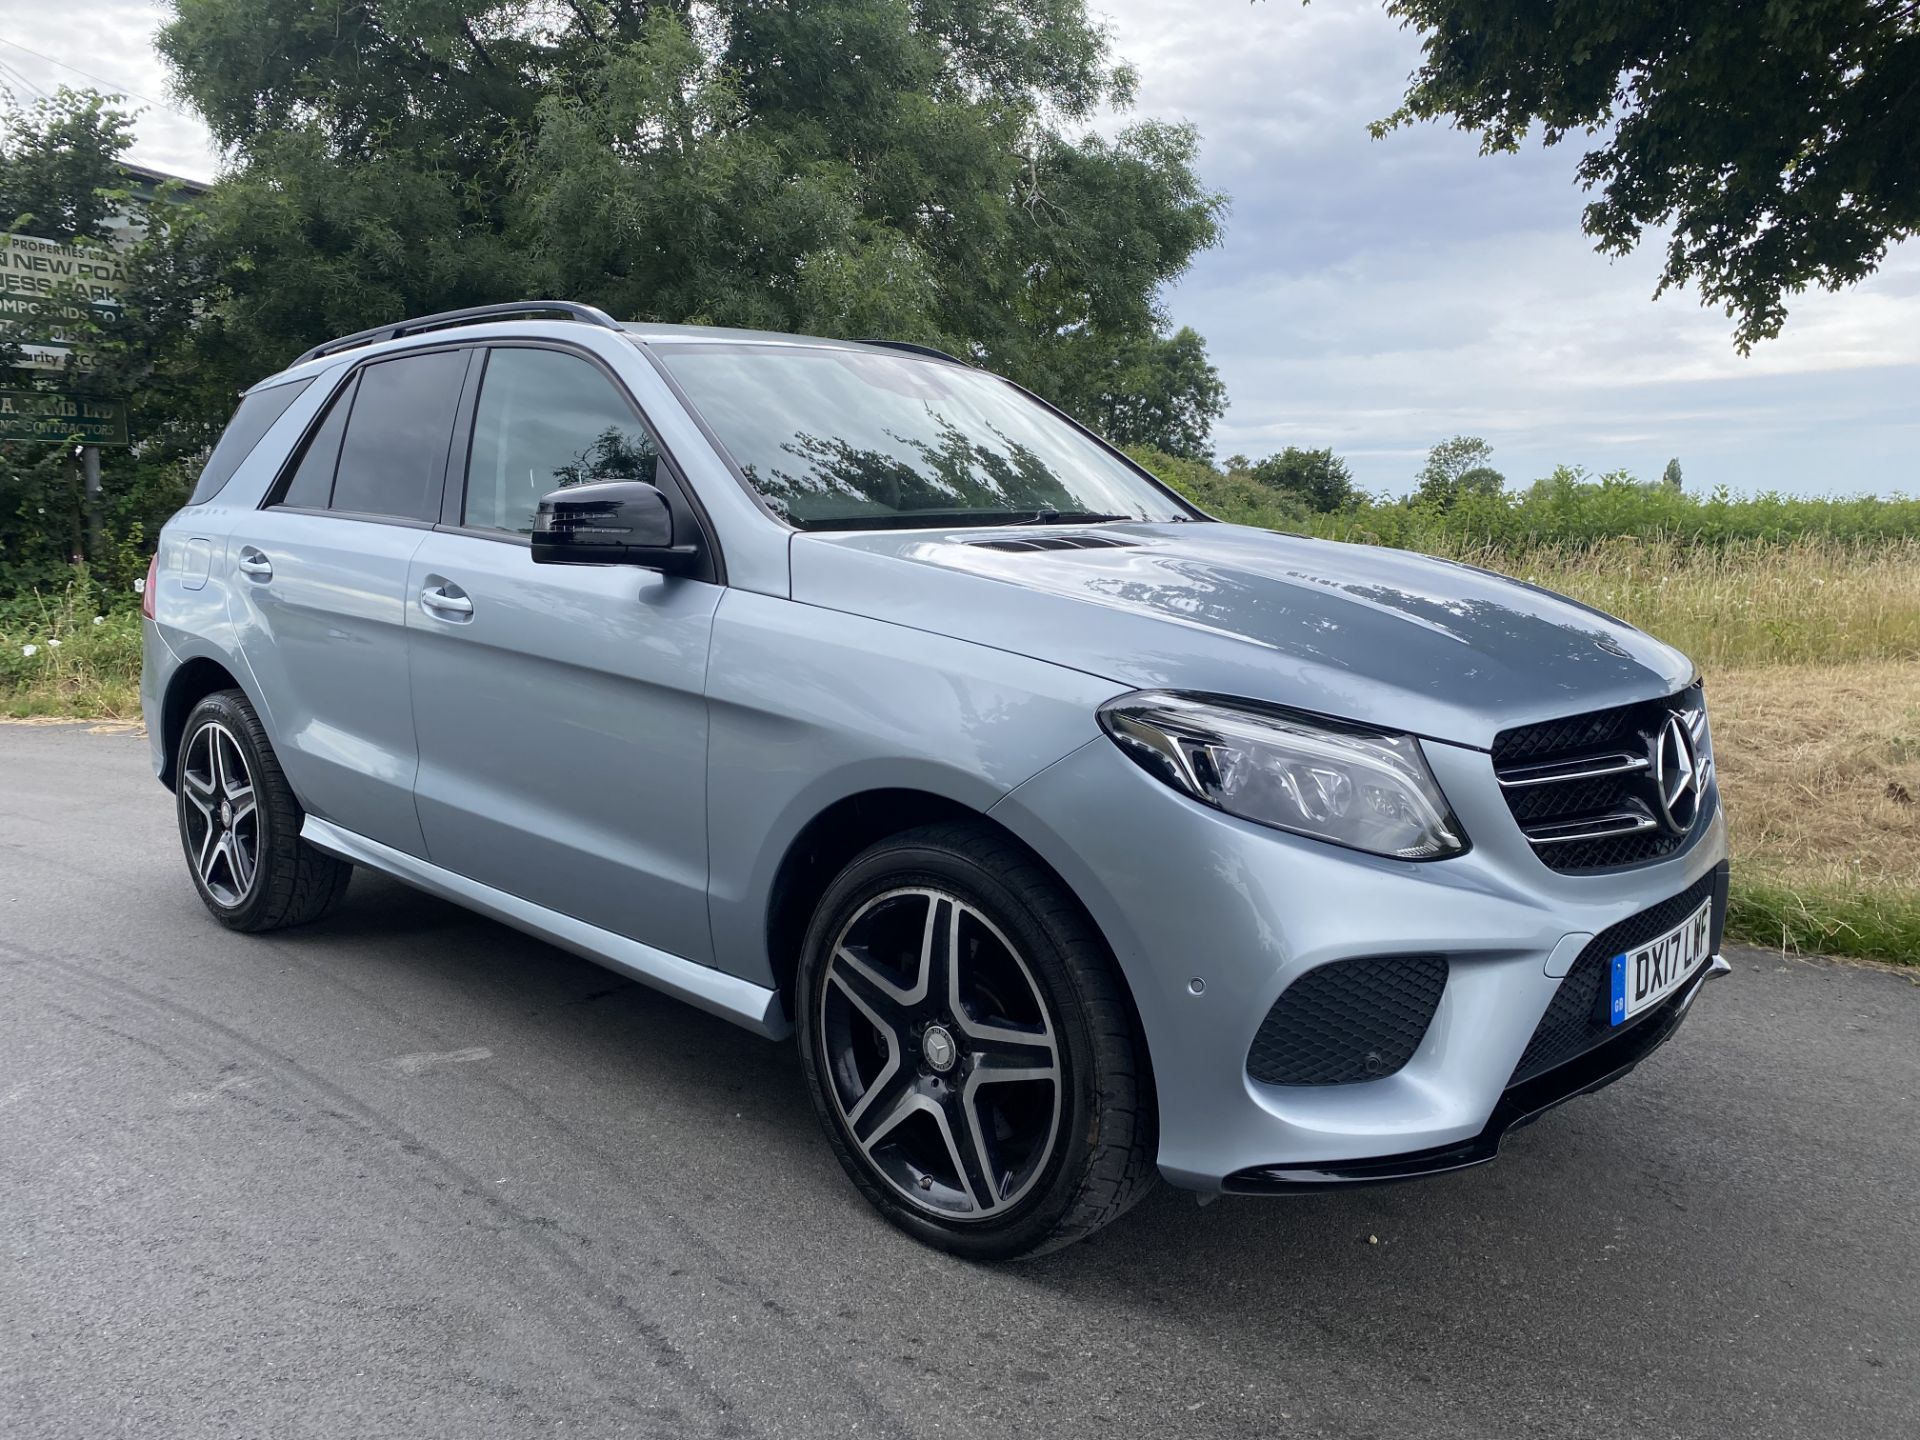 MERCEDES GLE 250d AMG-LINE "NIGHT EDITION" AUTO - 17 REG - 1 OWNER - FULL LEATHER - COMAND - NO VAT! - Image 2 of 36